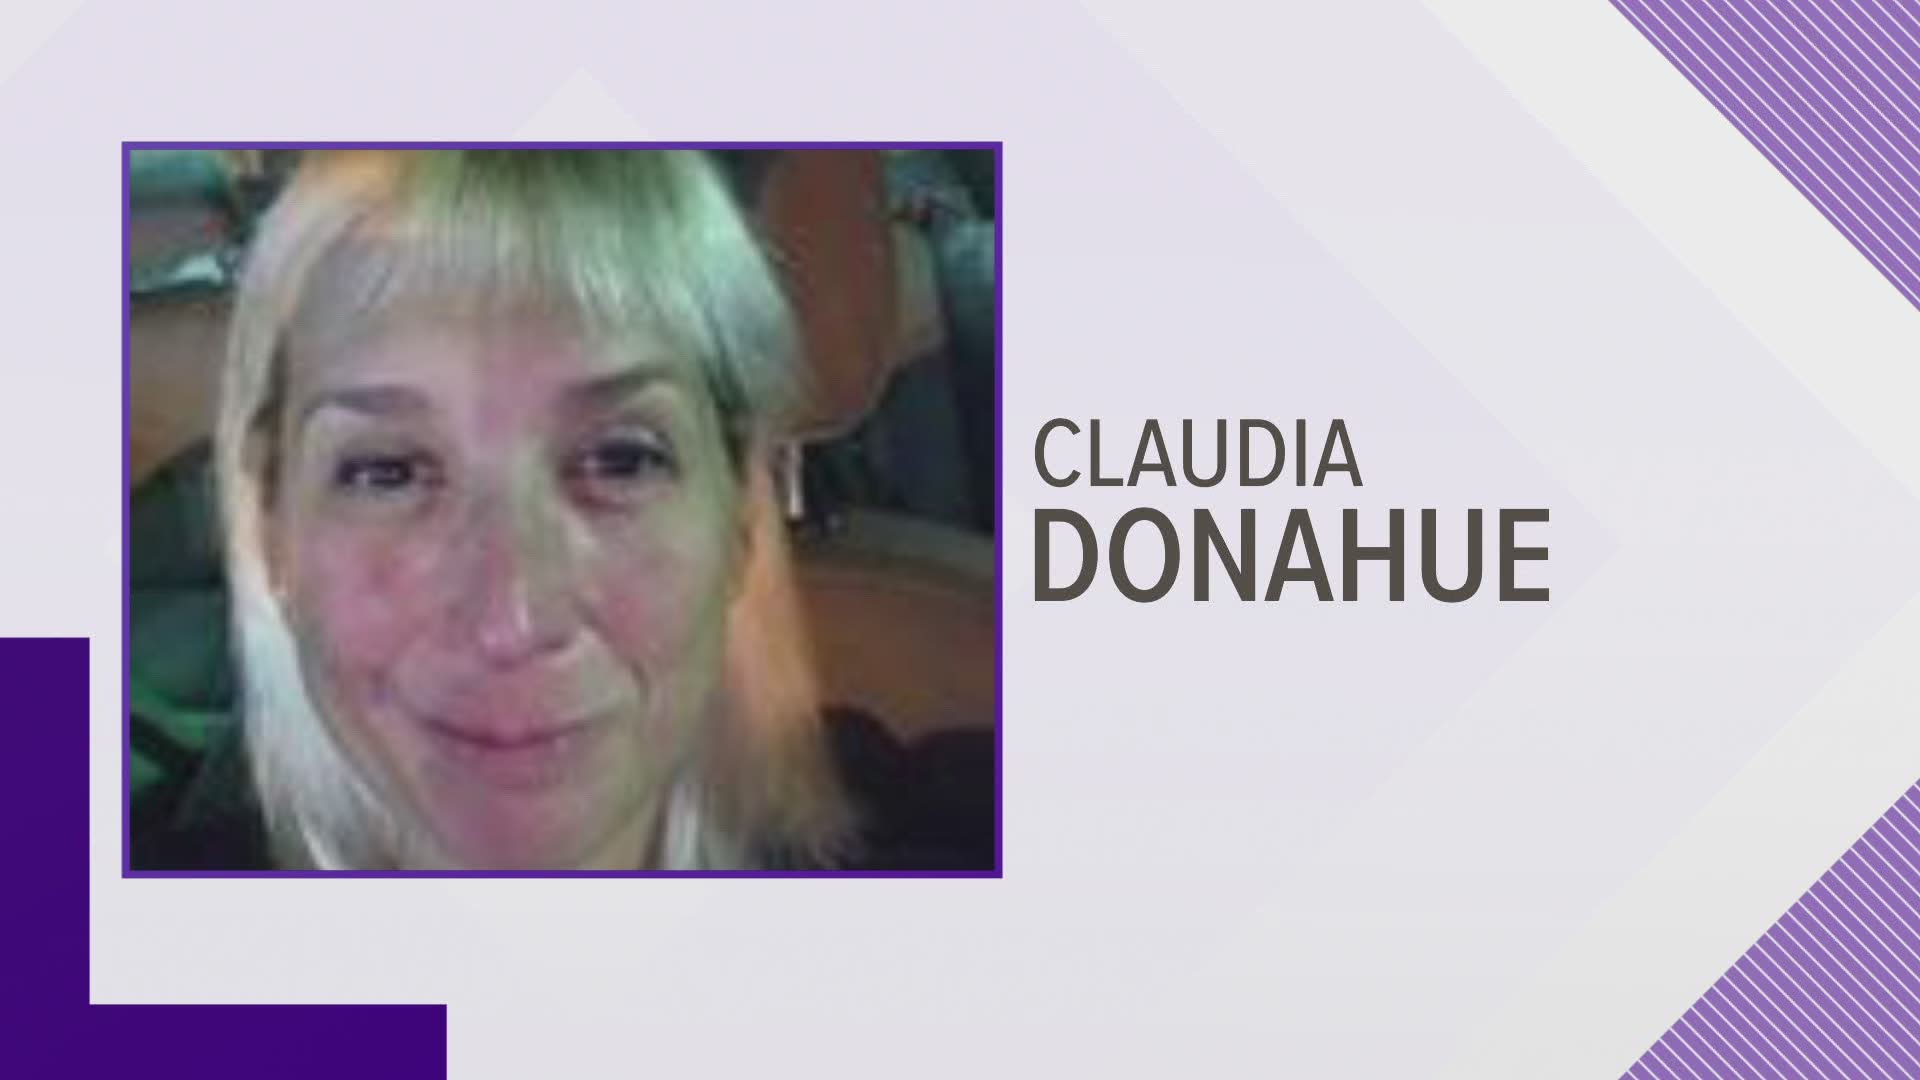 Police said Claudia Donahue is in a deteriorated mental state and may still be on Galveston Island.